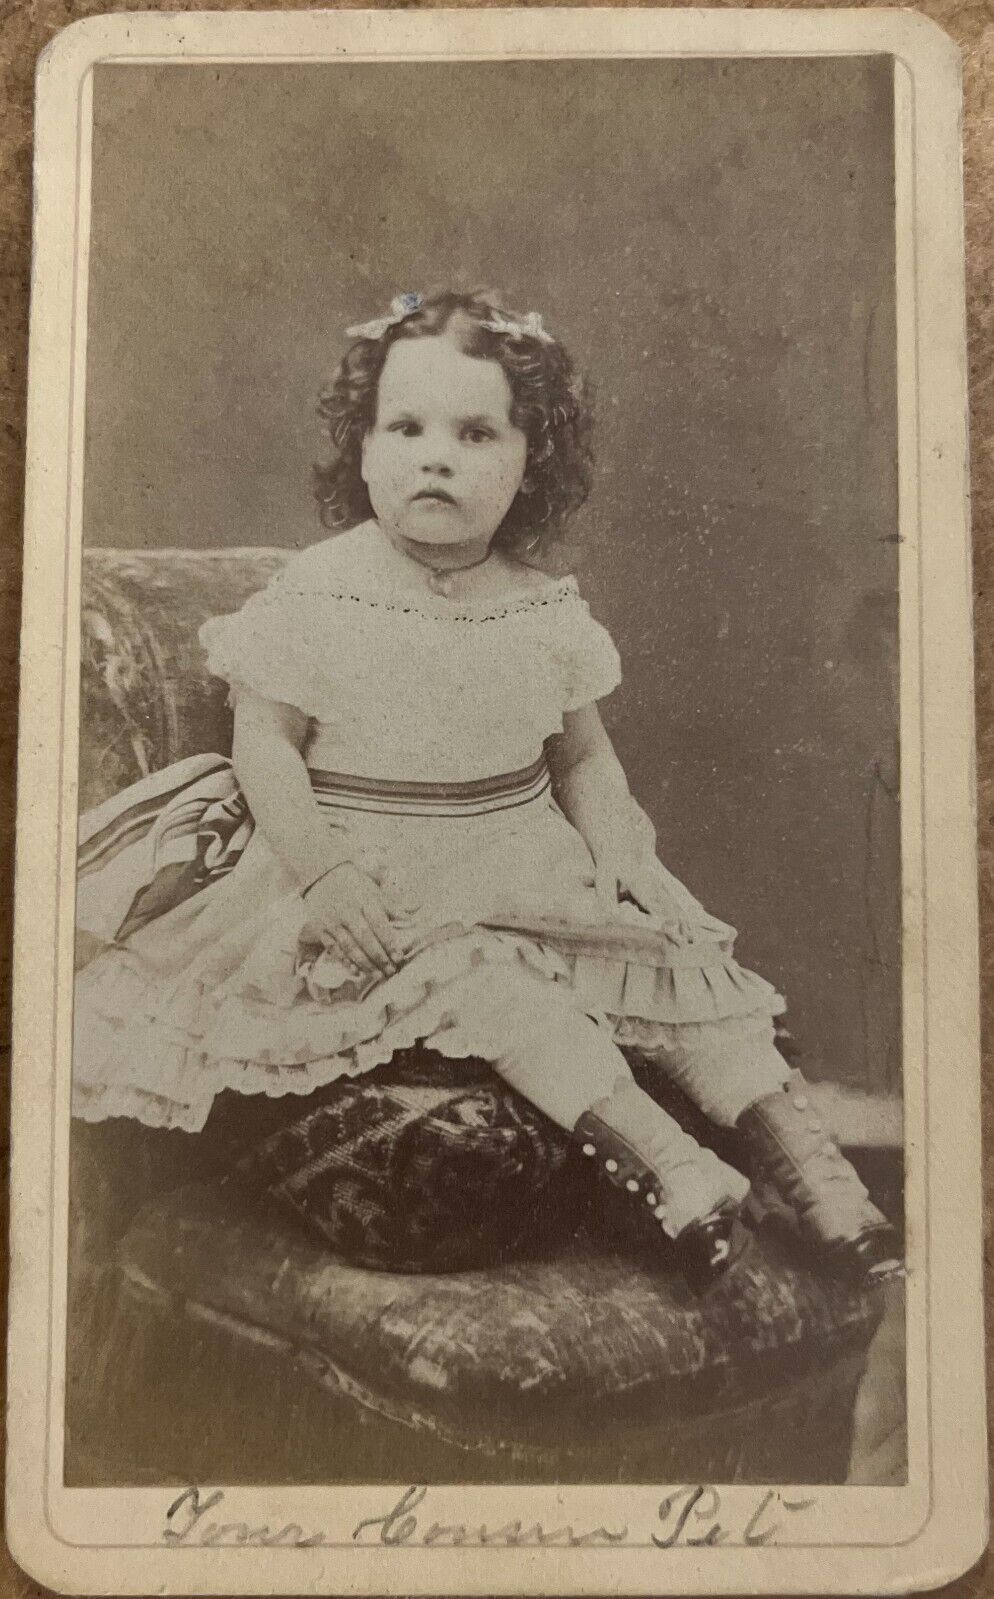 ~1870 CDV PHOTO POST CIVIL WAR SWEET LITTLE GIRL - NOTES TO COUSIN FRONT/BACK